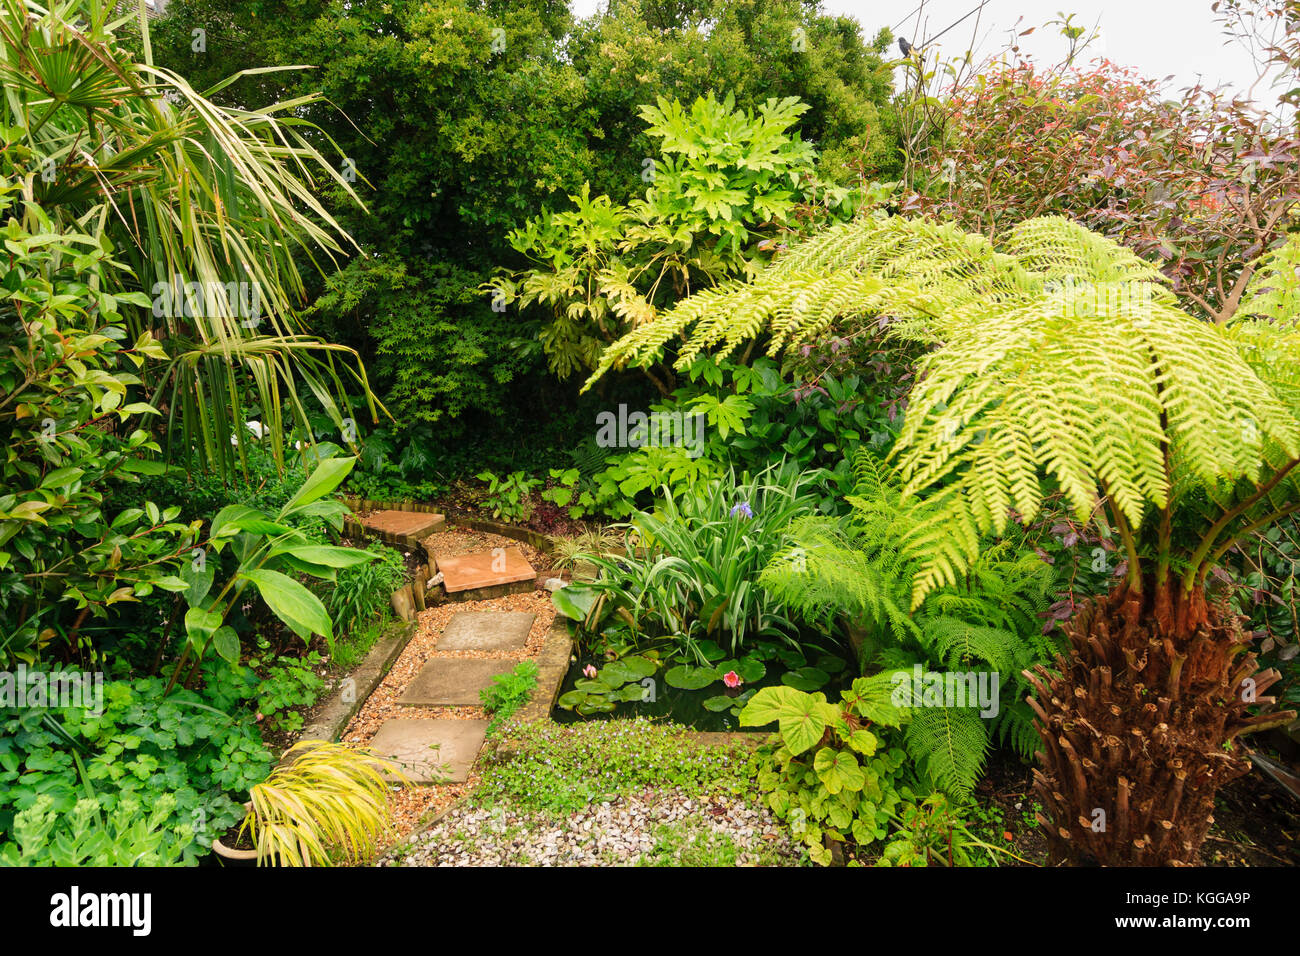 Small garden pond in an exotic garden in Plymouth, UK, surrounded by large leaved foliage plants Stock Photo